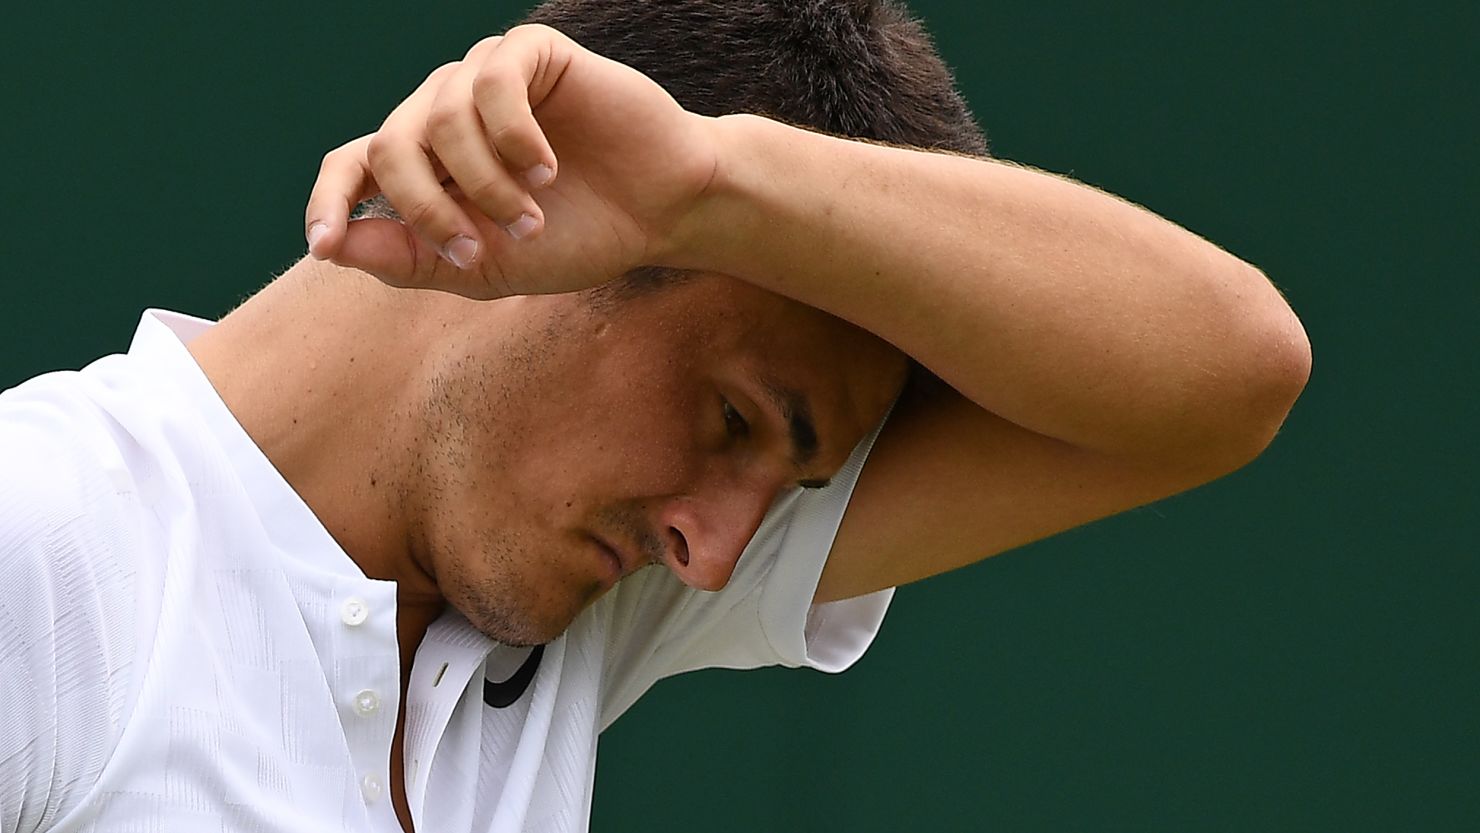 Tomic lost to Germany's Mischa Zverev in the first round.